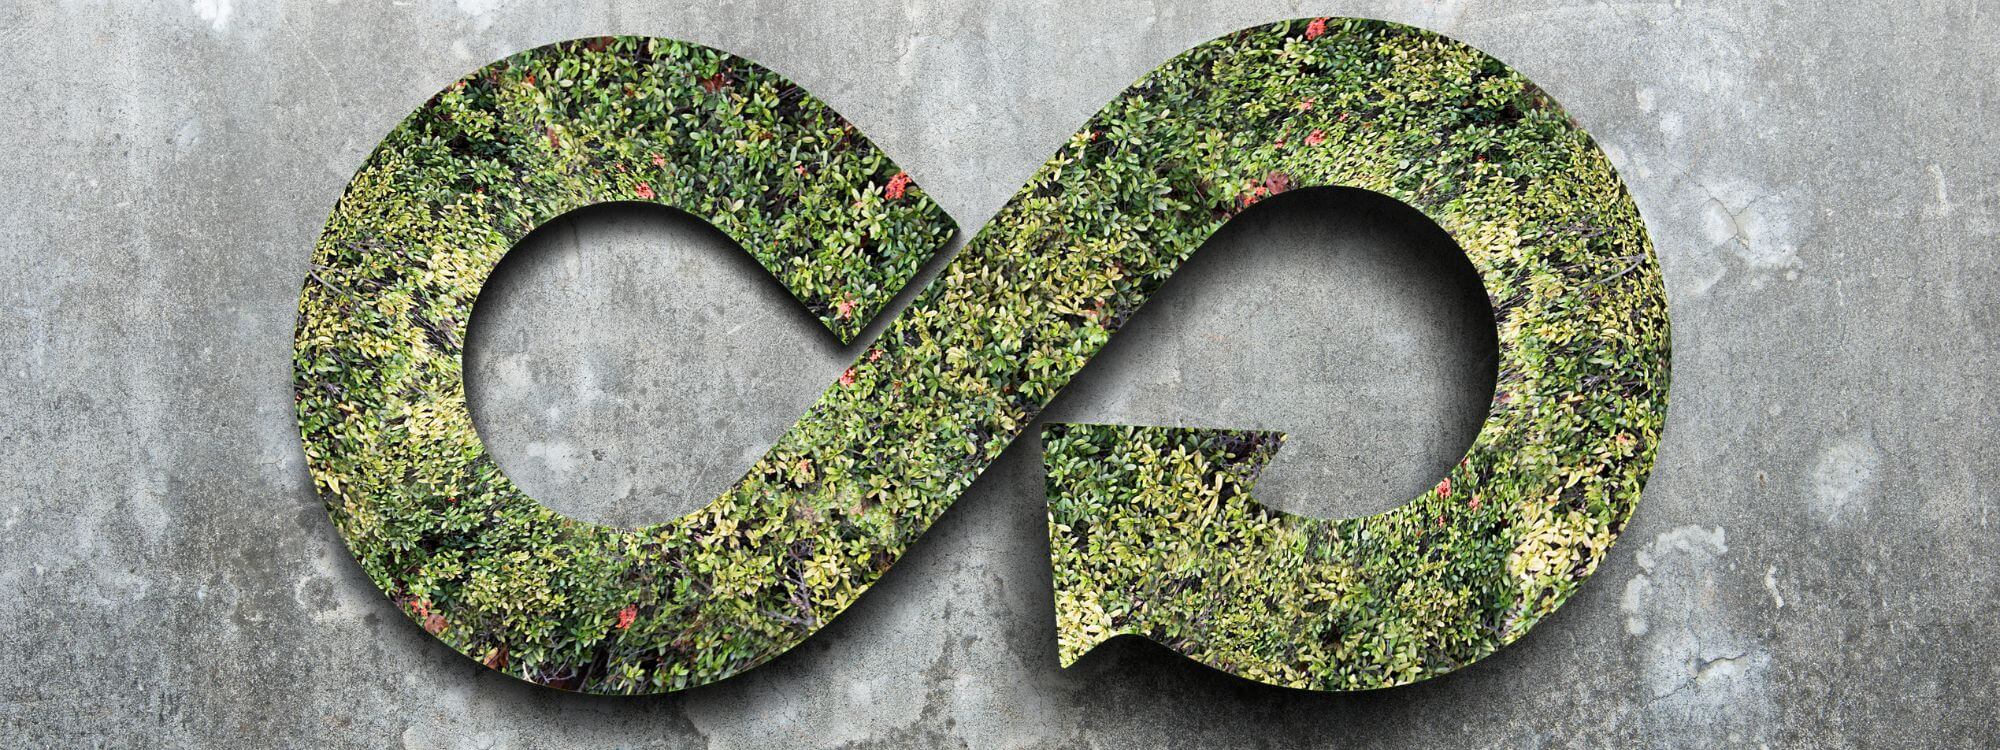 symbol that resembles a figure eight laying on it's side to represent the circular economy